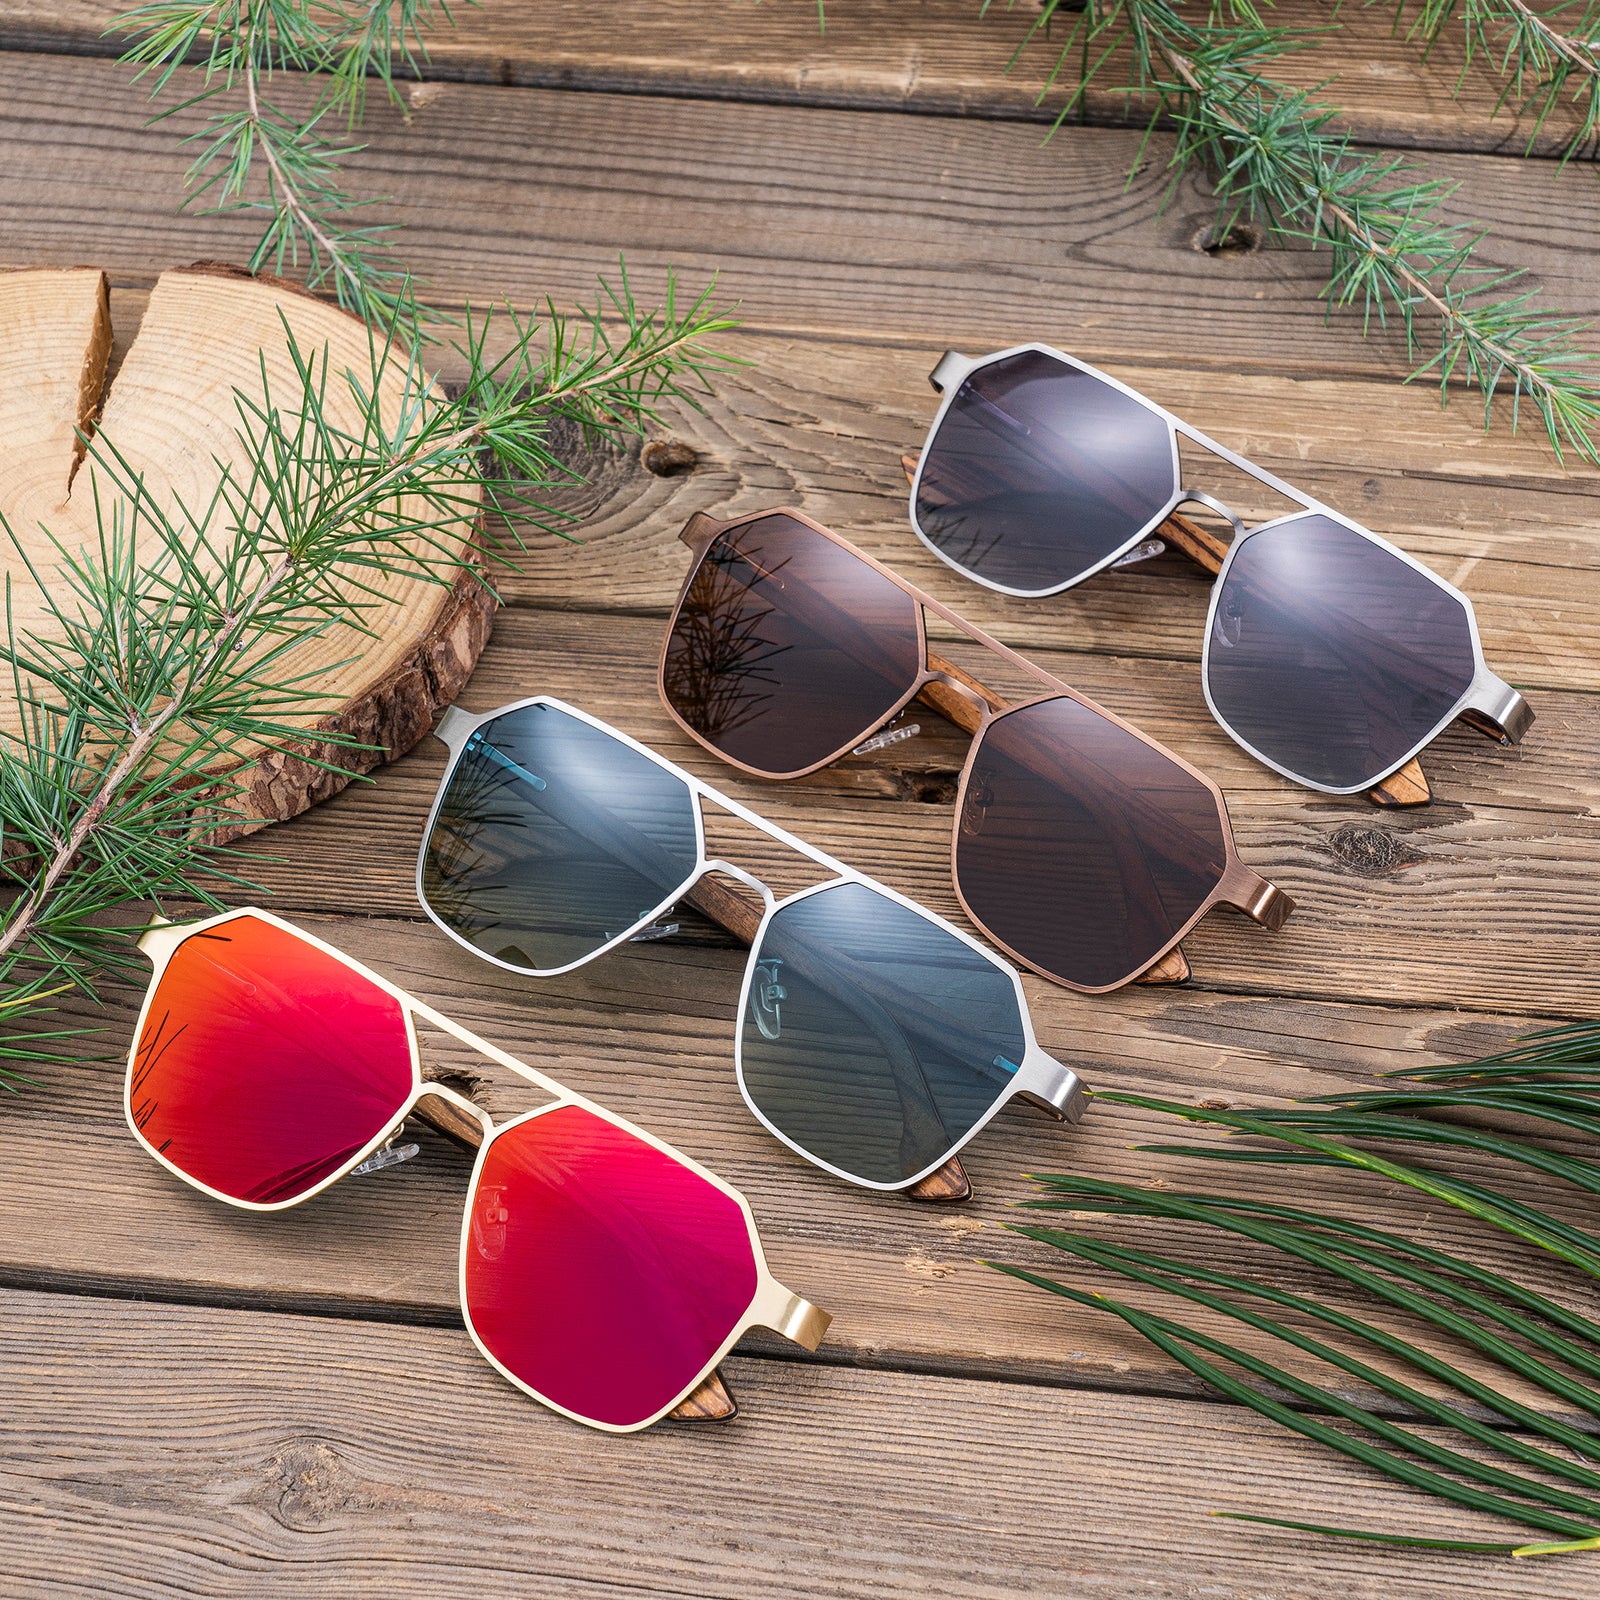 Best Groomsmen Sunglasses with Personalized Box ($24.99) - GroomsDay